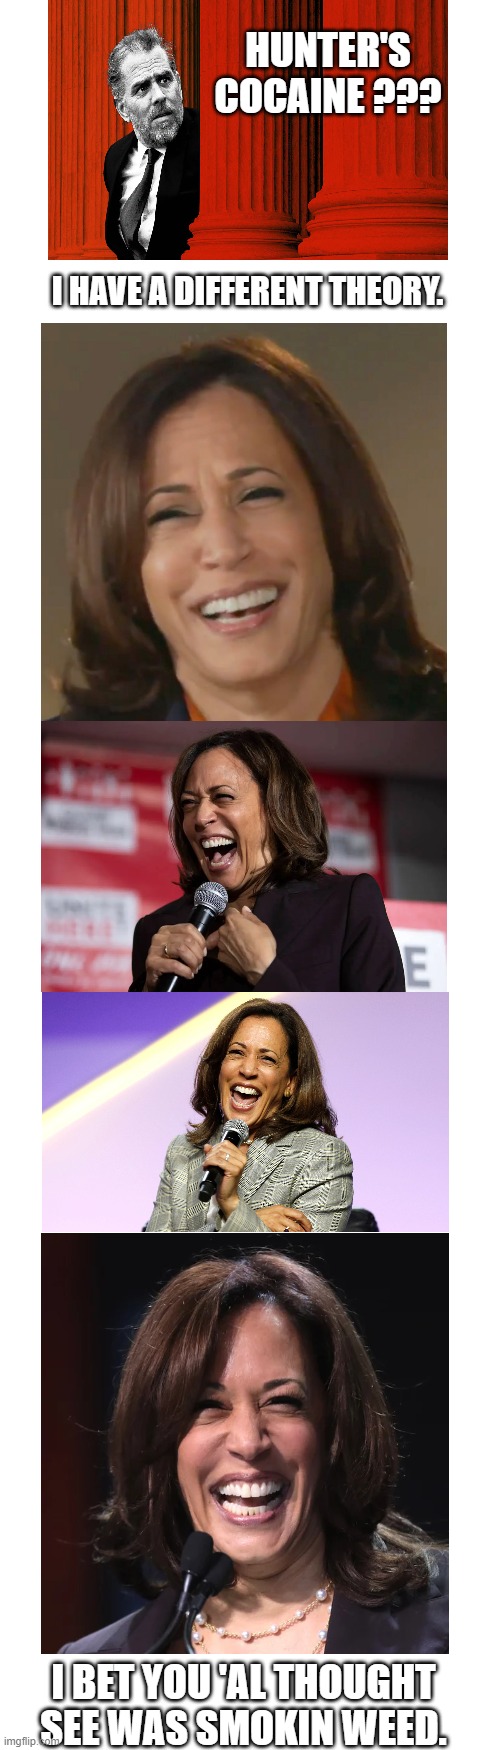 Hunter's Cocaine ??? | HUNTER'S COCAINE ??? I HAVE A DIFFERENT THEORY. I BET YOU 'AL THOUGHT SEE WAS SMOKIN WEED. | image tagged in memes,hunter,cocaine,kamala | made w/ Imgflip meme maker